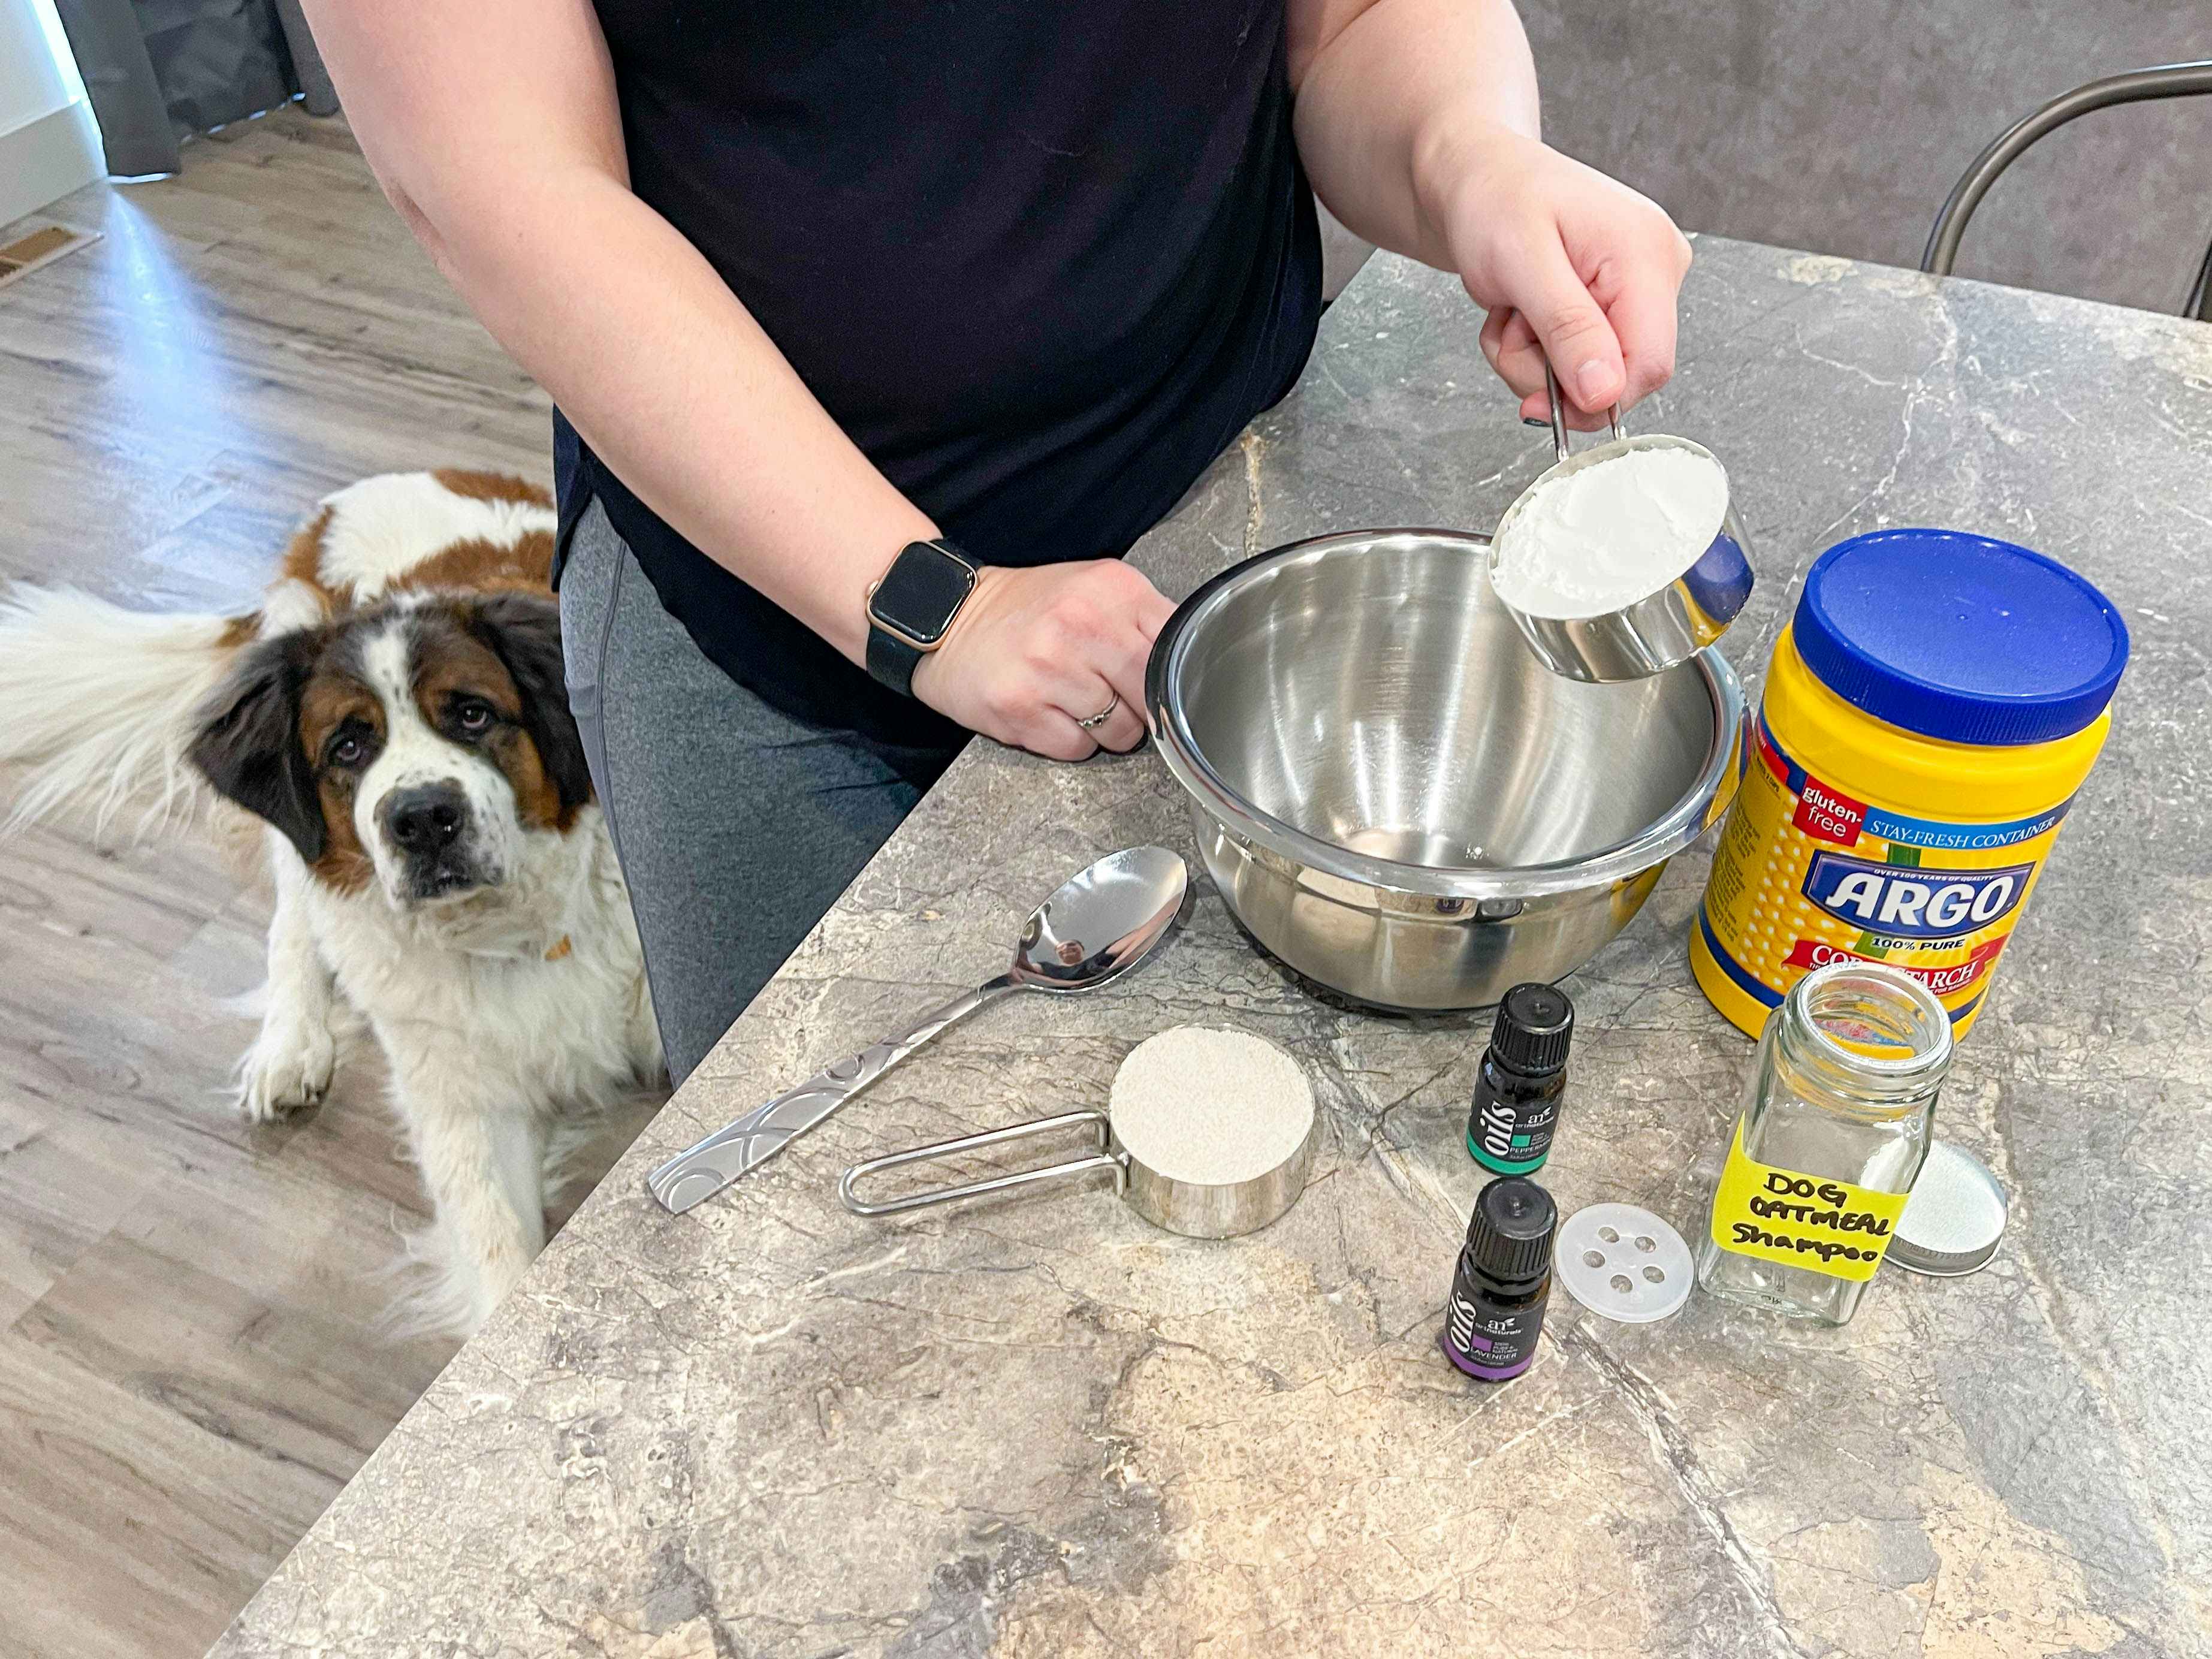 A person putting ingredients for the DIY Dog Oatmeal Shampoo into a metal mixing bowl that is sitting on their kitchen counter next to more of the ingredients. A dog is just behind the person, peering out.